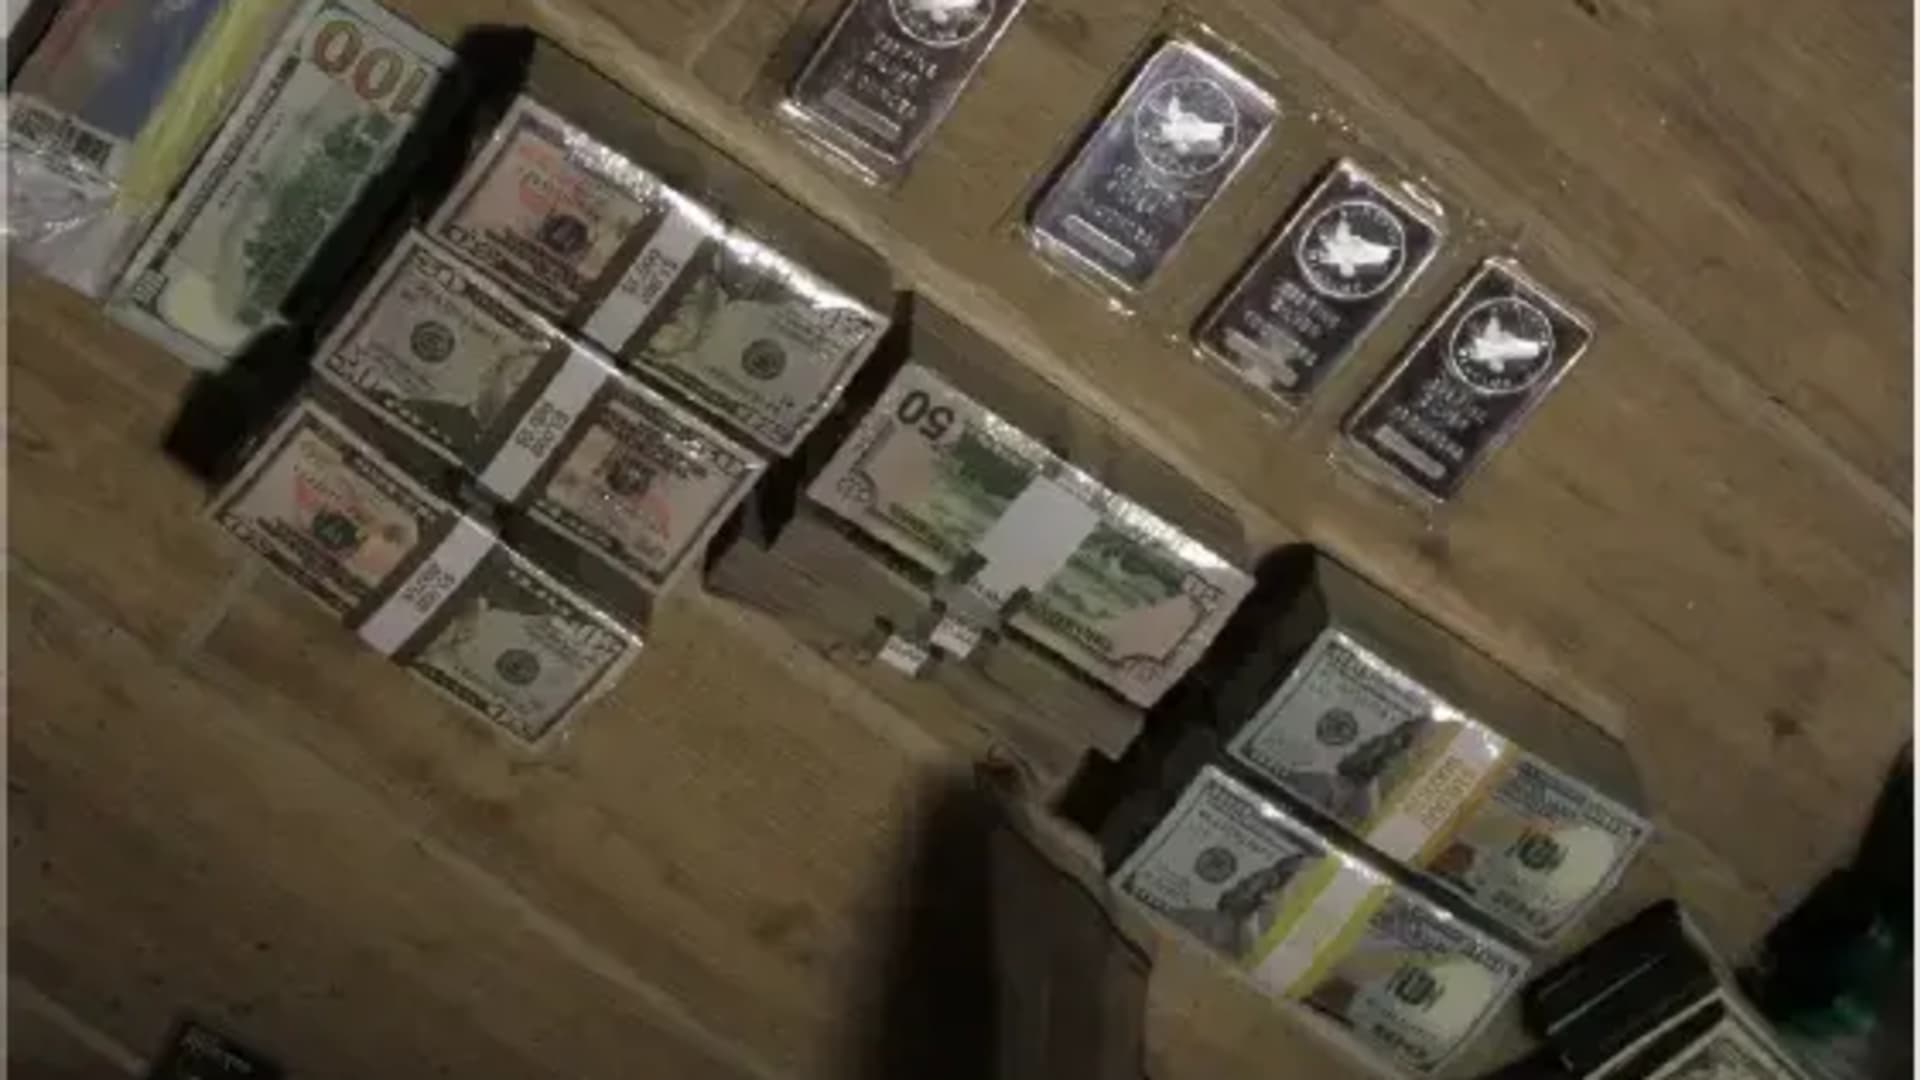 Physical bitcoin and cash investigators found during the search warrant. 